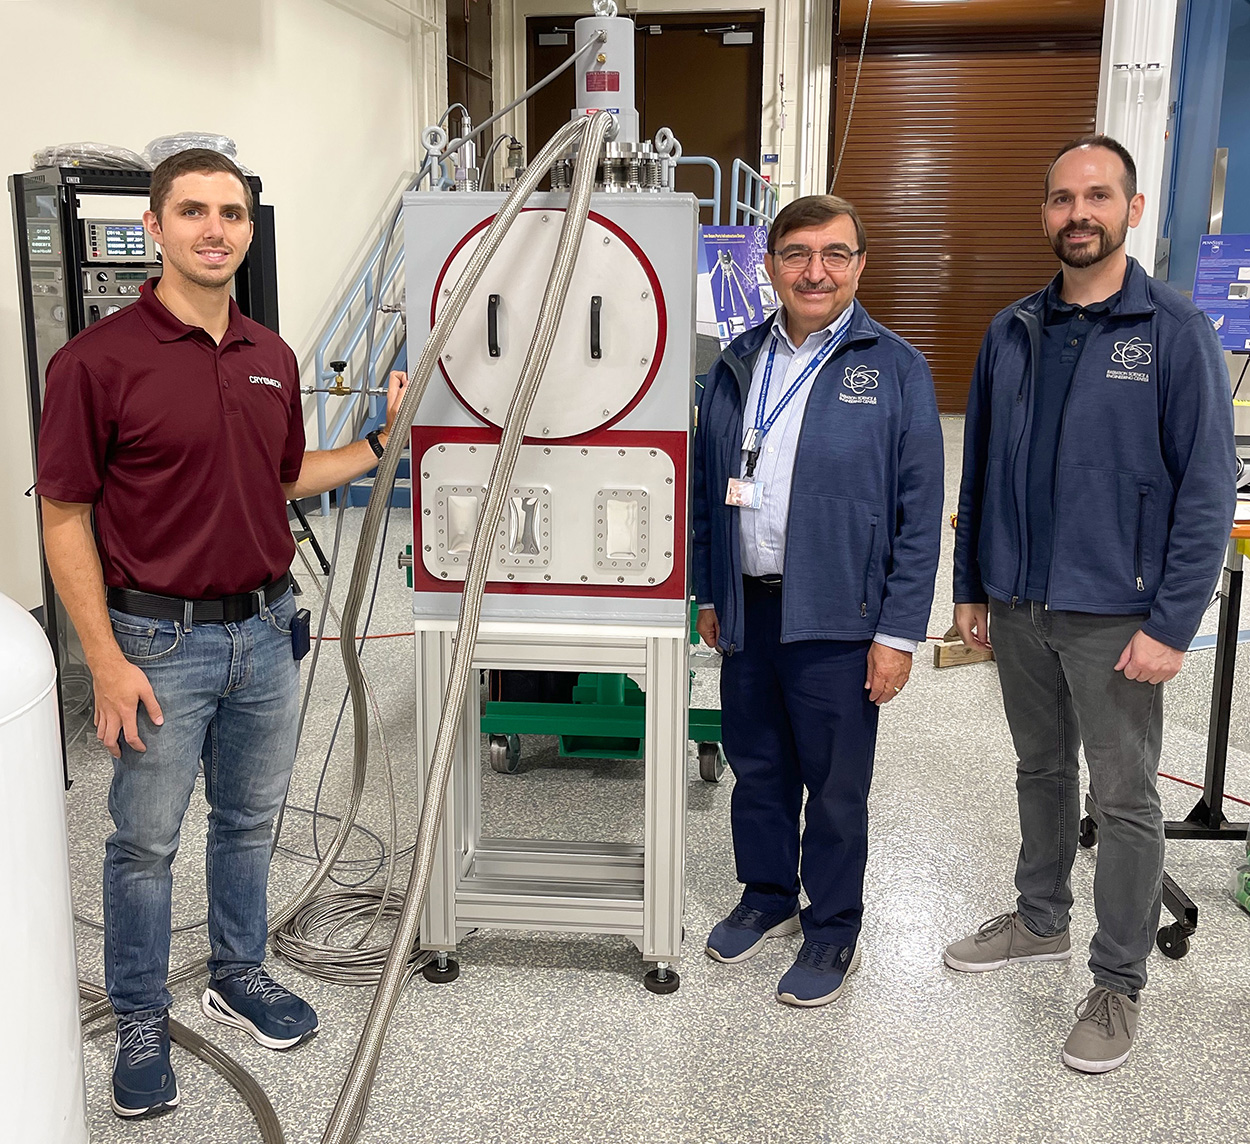 Tim Hanrahan, Dr. Kenan Ünlü and Daniel Beck with the Penn State’s new Cryomech cryostat designed to enable small-angle neutron scattering.